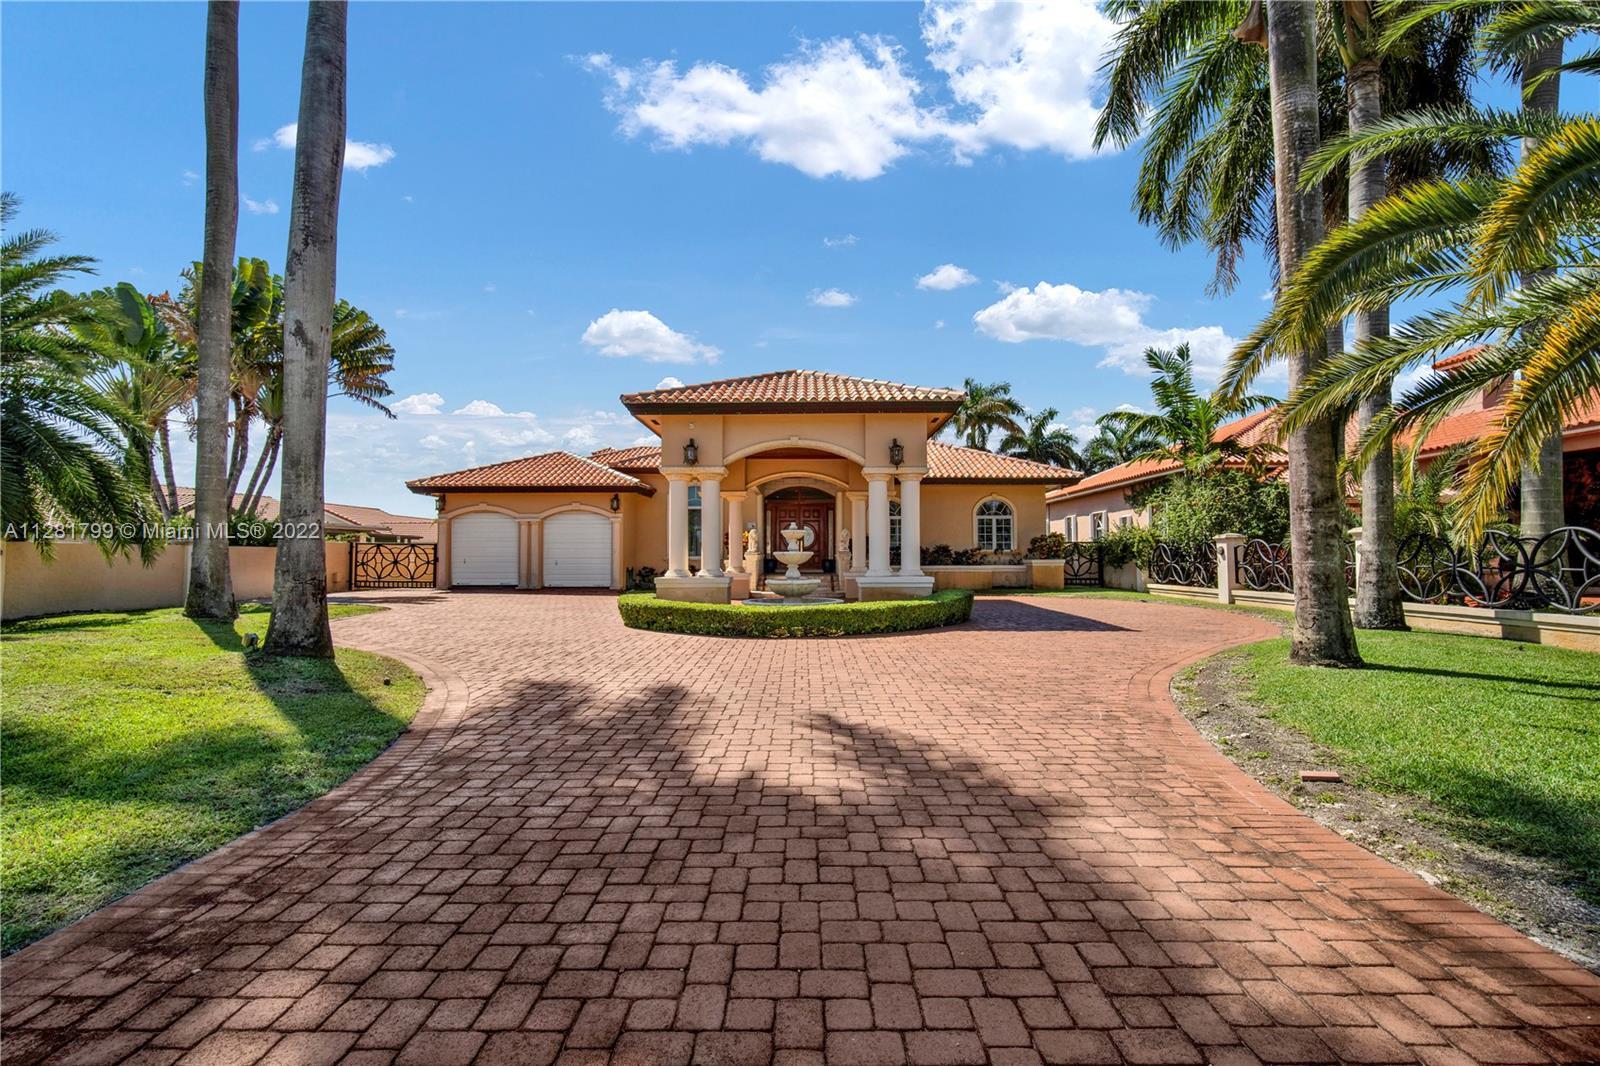 Euro-Spanish custom built Estate: In the heart of Miami, this prime half acre lot offers charming gr